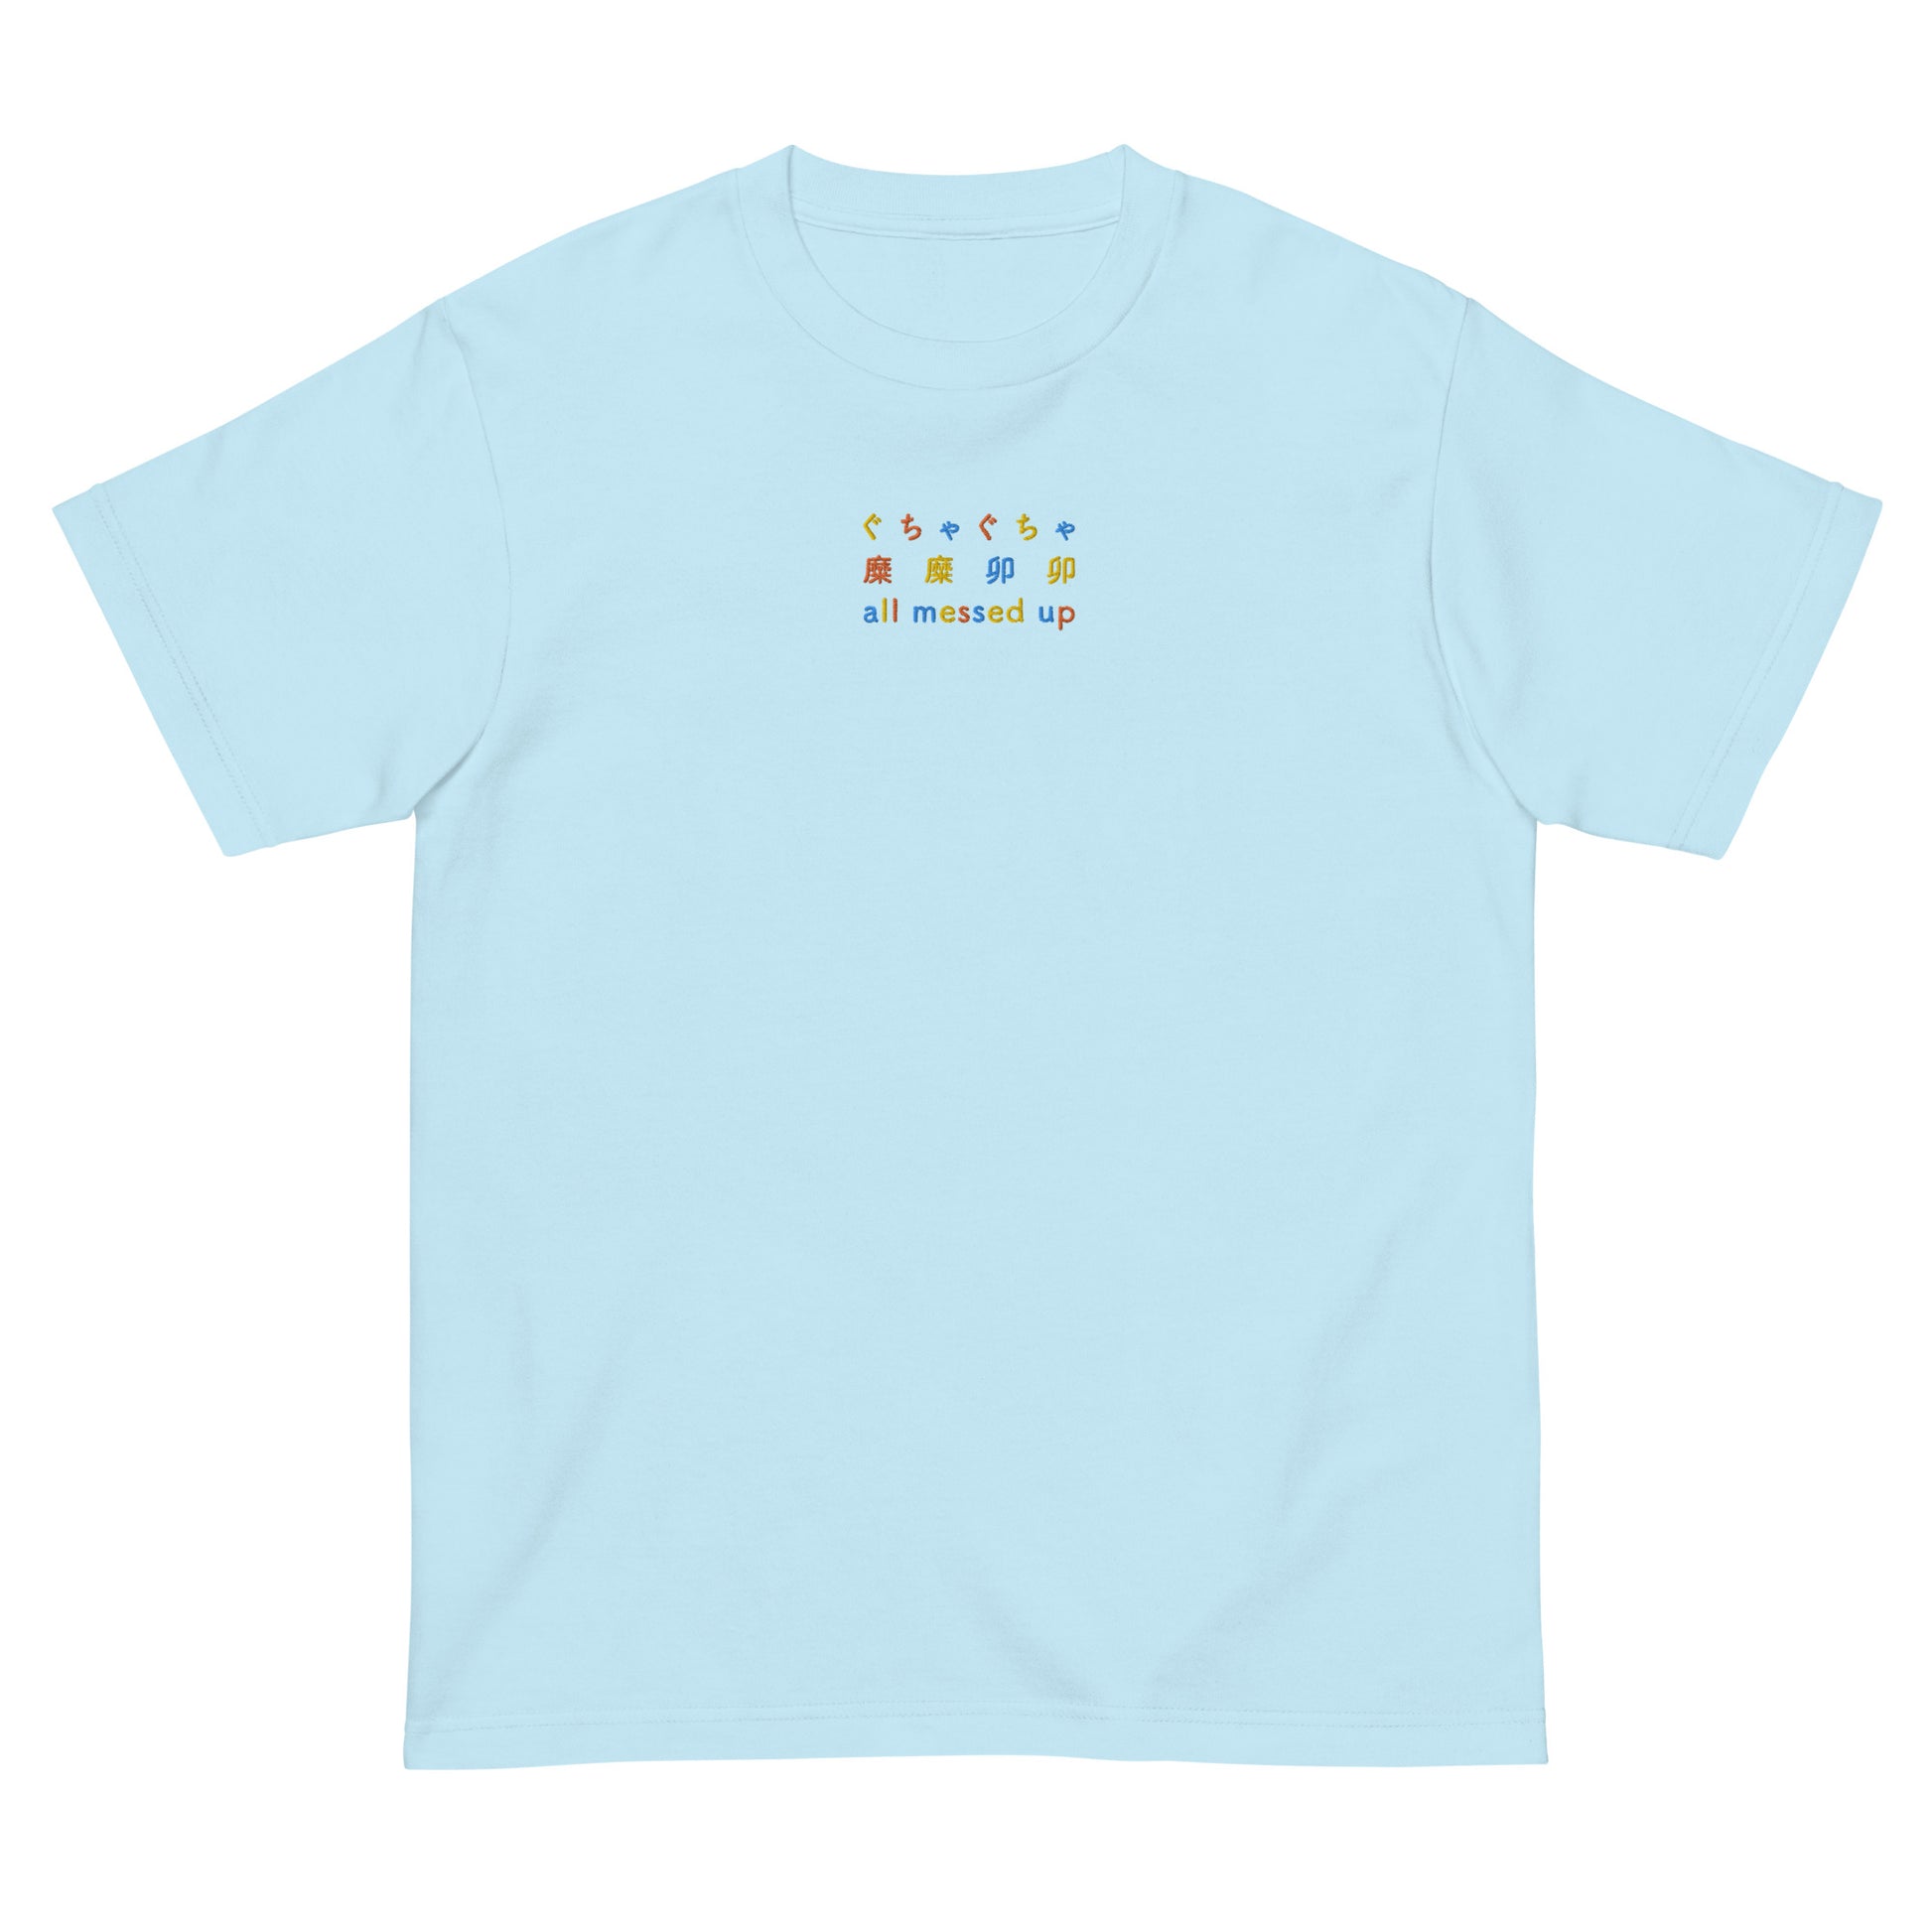 Light Blue High Quality Tee - Front Design with an Yellow,Orange,Blue Embroidery "All Messed Up" in Japanese,Chinese and English